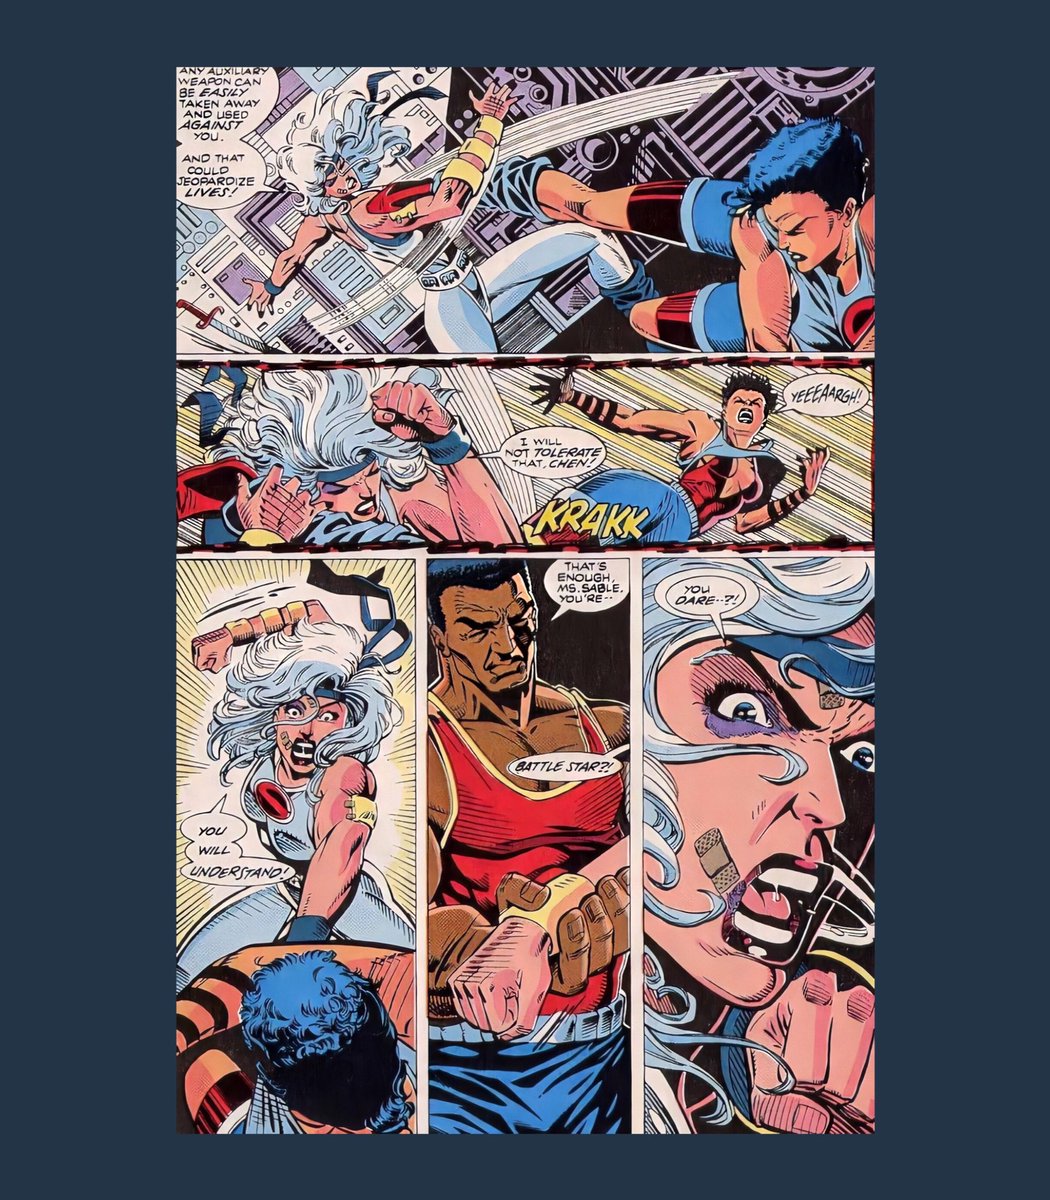 Silver Sable was unstable and lost control during the training session. Stressed out after a whole battle in #8, finding out that her father was alive after years of missing. Look at her catching the sword with her bare hands. - Silver Sable (1992) #9 pg 3-4